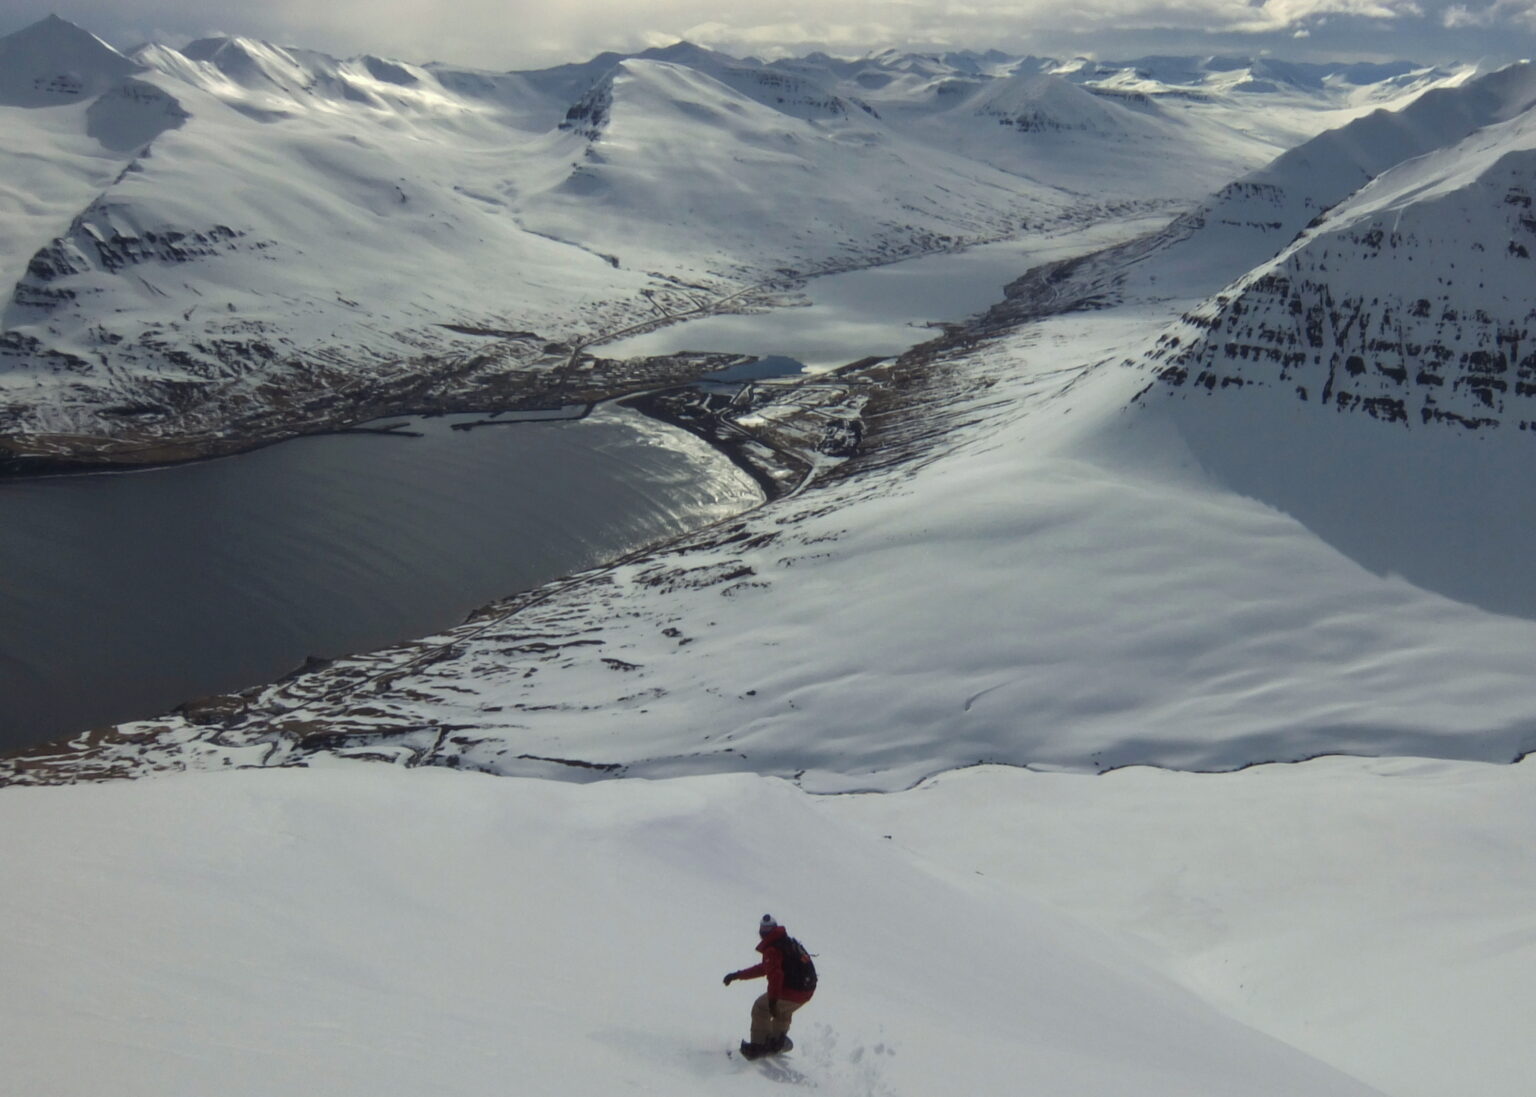 Snowboarding down from the summit of Arnfinnsfjall with Ólafsfjörður in the distance in Northern Iceland